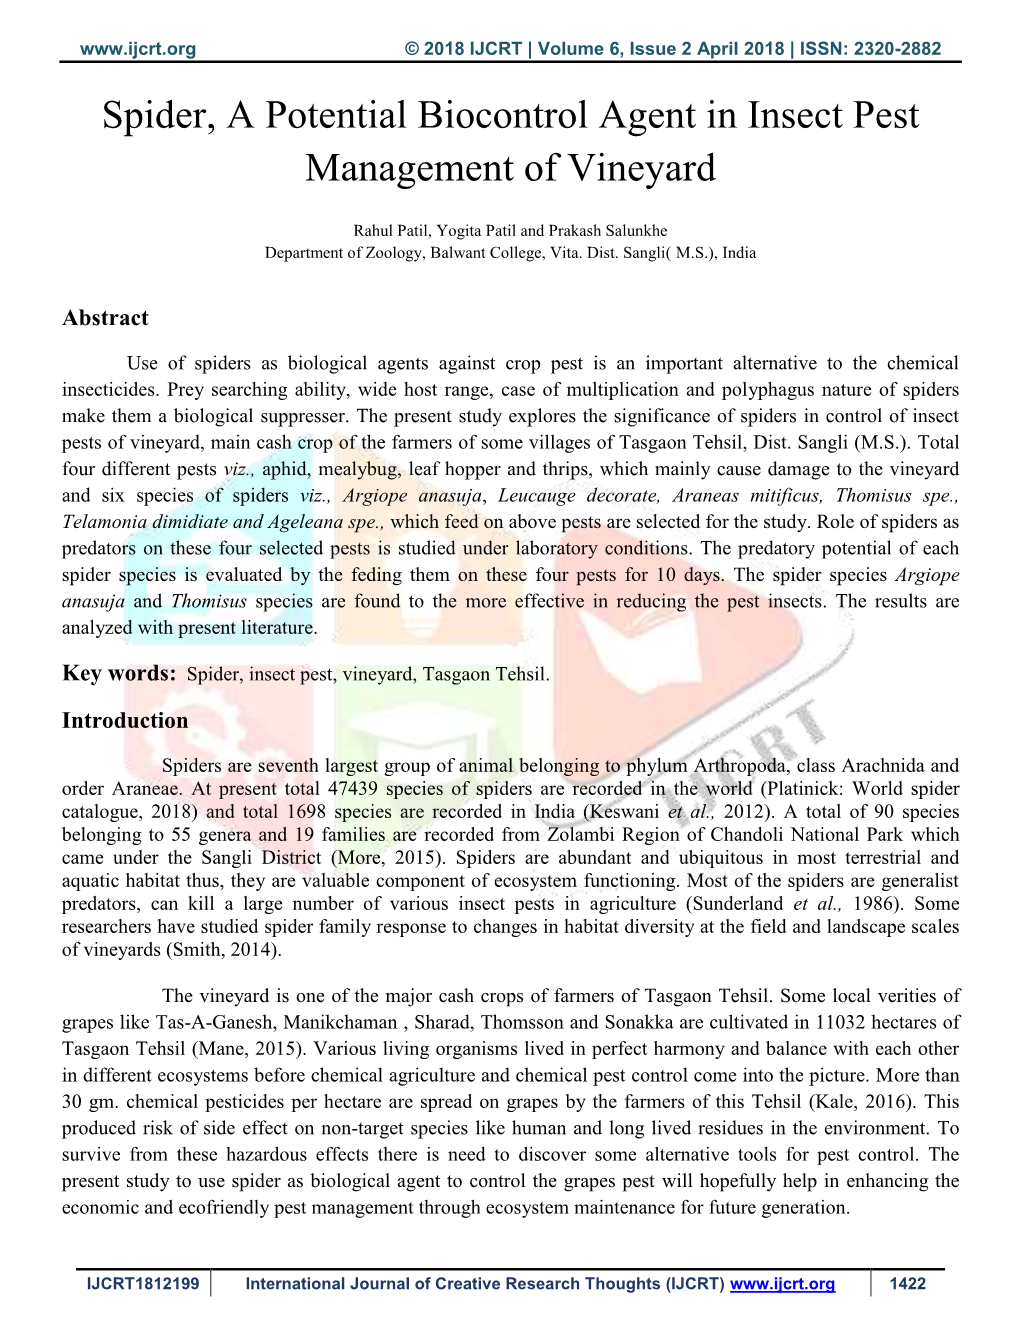 Spider, a Potential Biocontrol Agent in Insect Pest Management of Vineyard